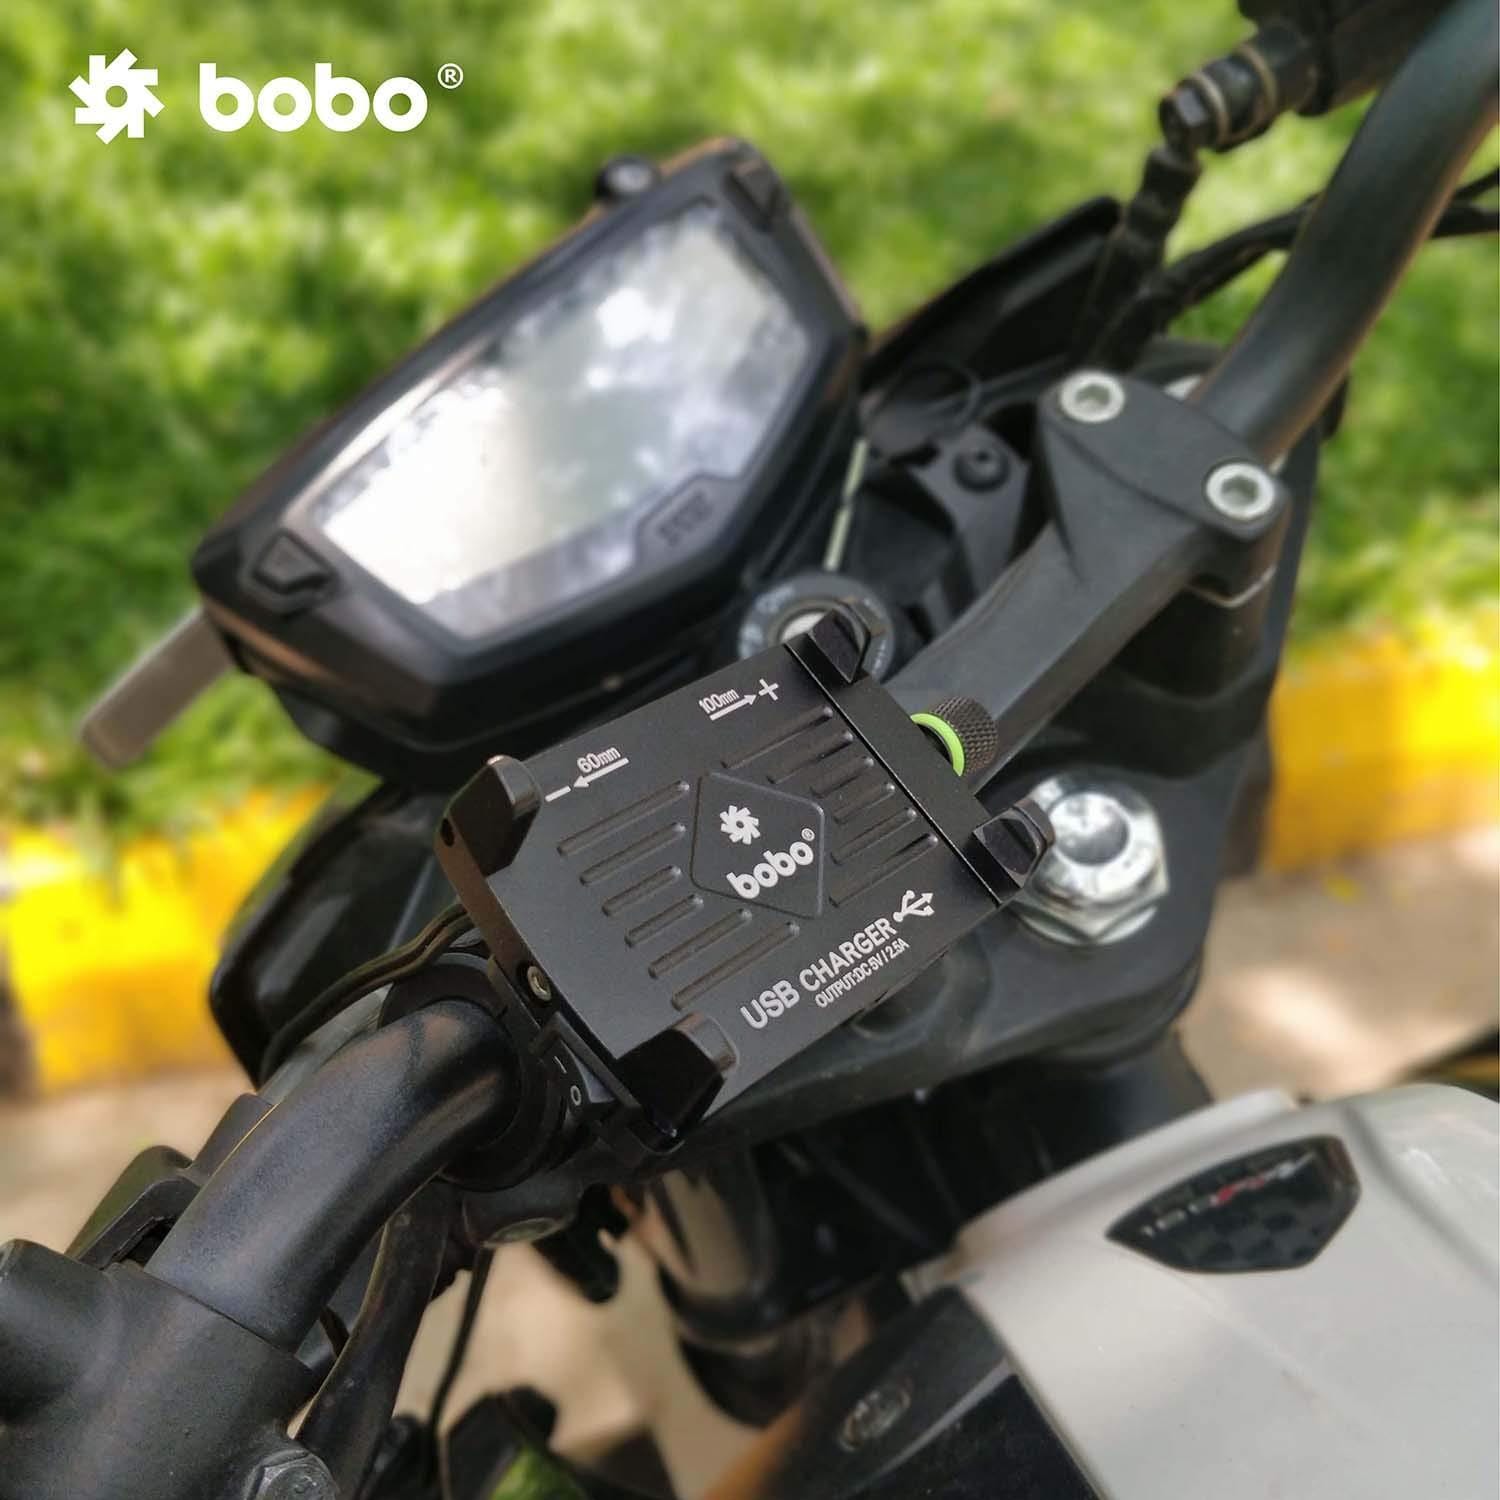 Bobo Gears BOBO BM2 Claw-Grip Aluminium Bike Phone Holder (with 2.5A USB charger) Motorcycle Mobile Mount